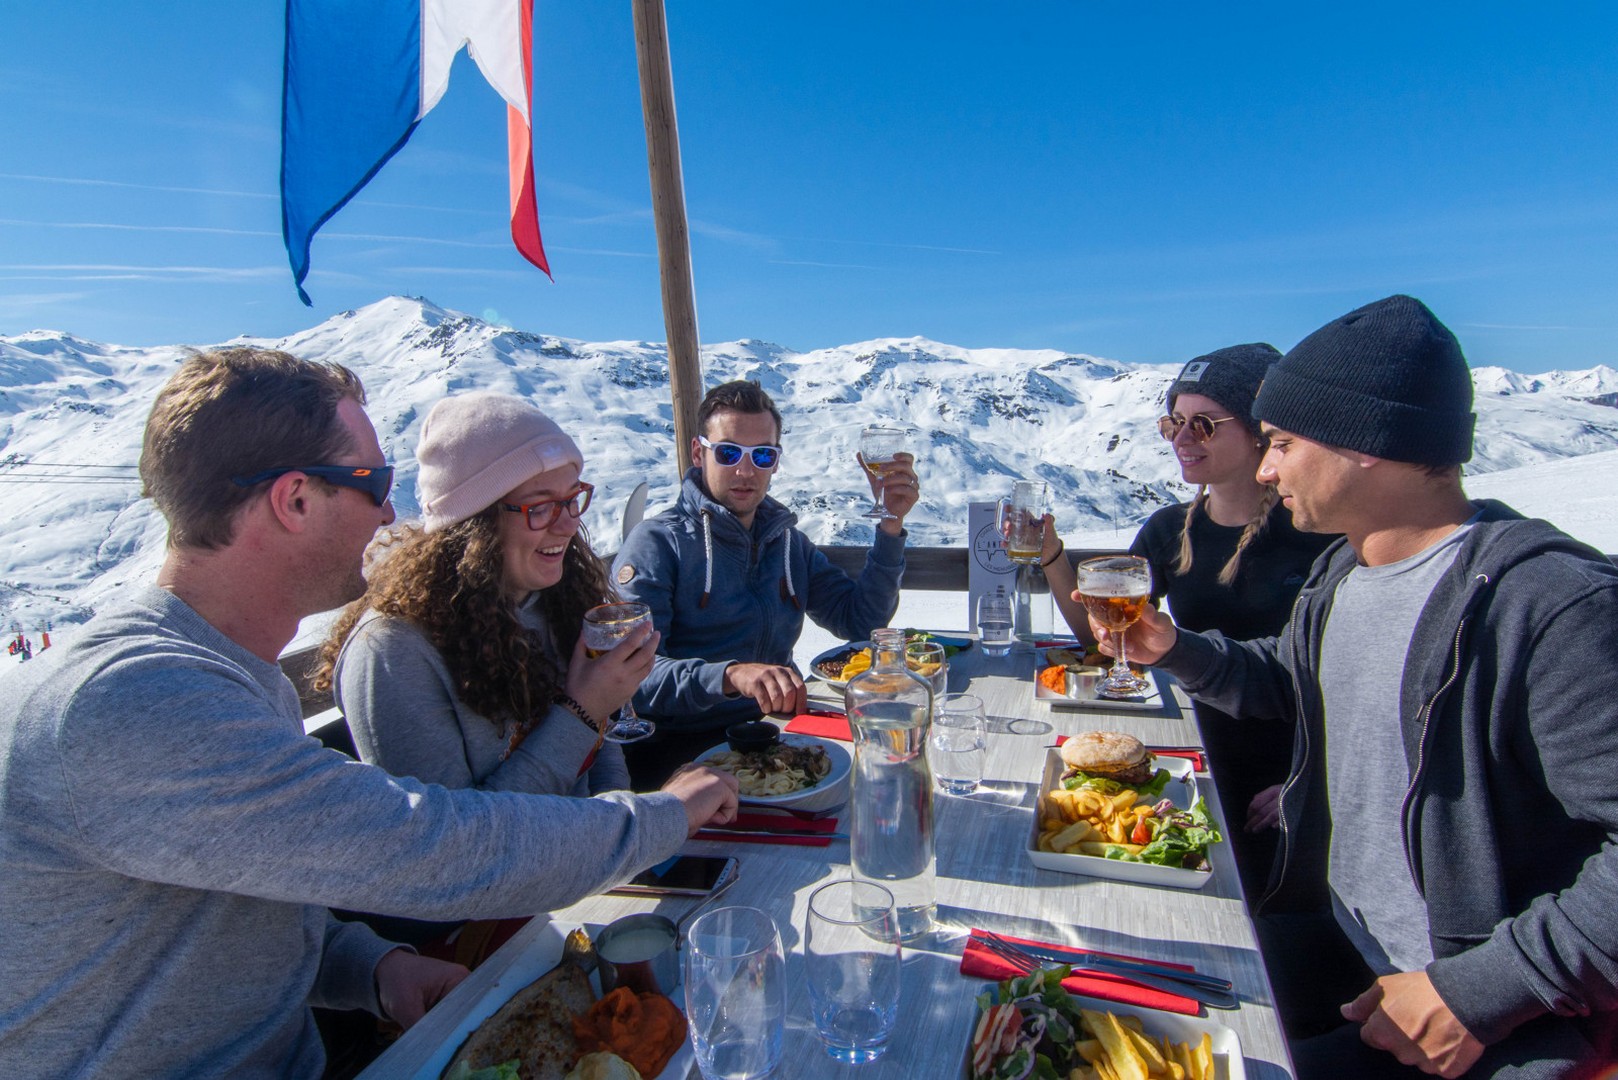 Lunch with friends on the ski slopes